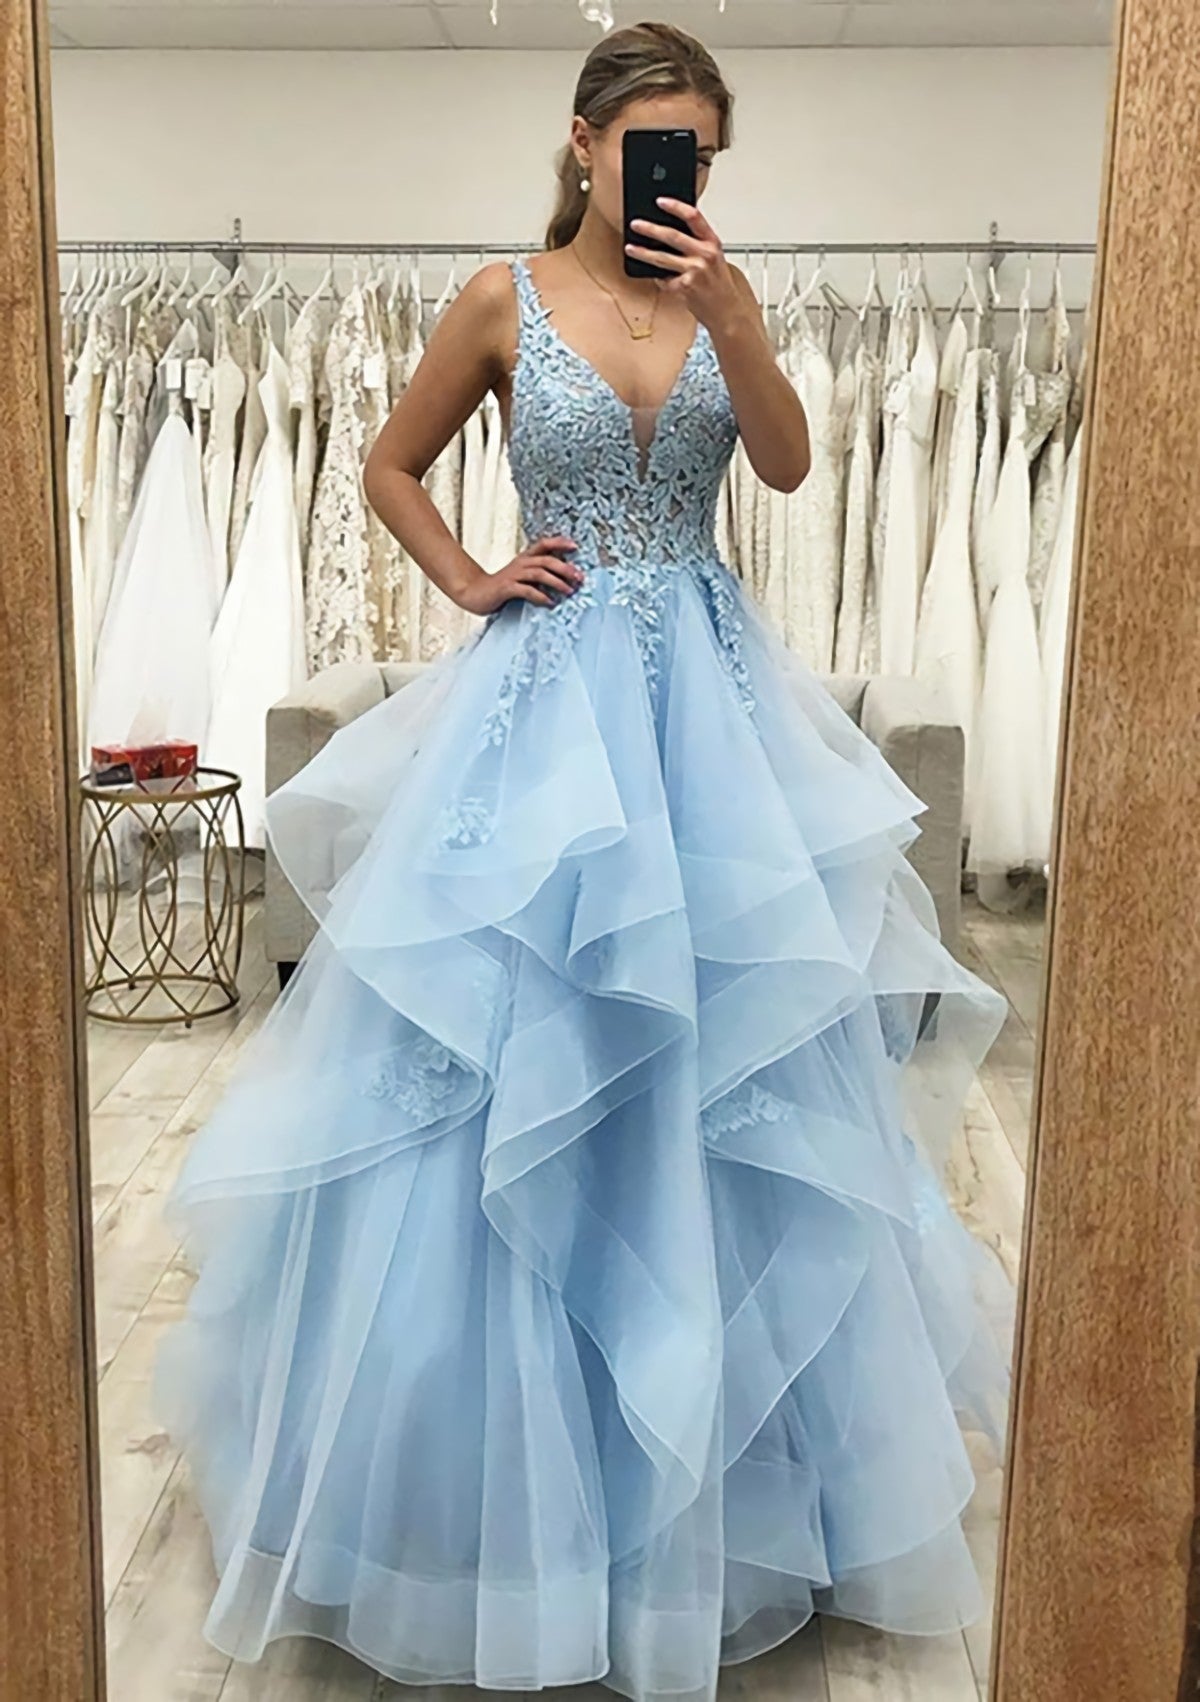 A-line V Neck Sleeveless Long/Floor-Length Tulle Satin Corset Prom Dress With Lace Appliqued Gowns, Plu Size Prom Dress